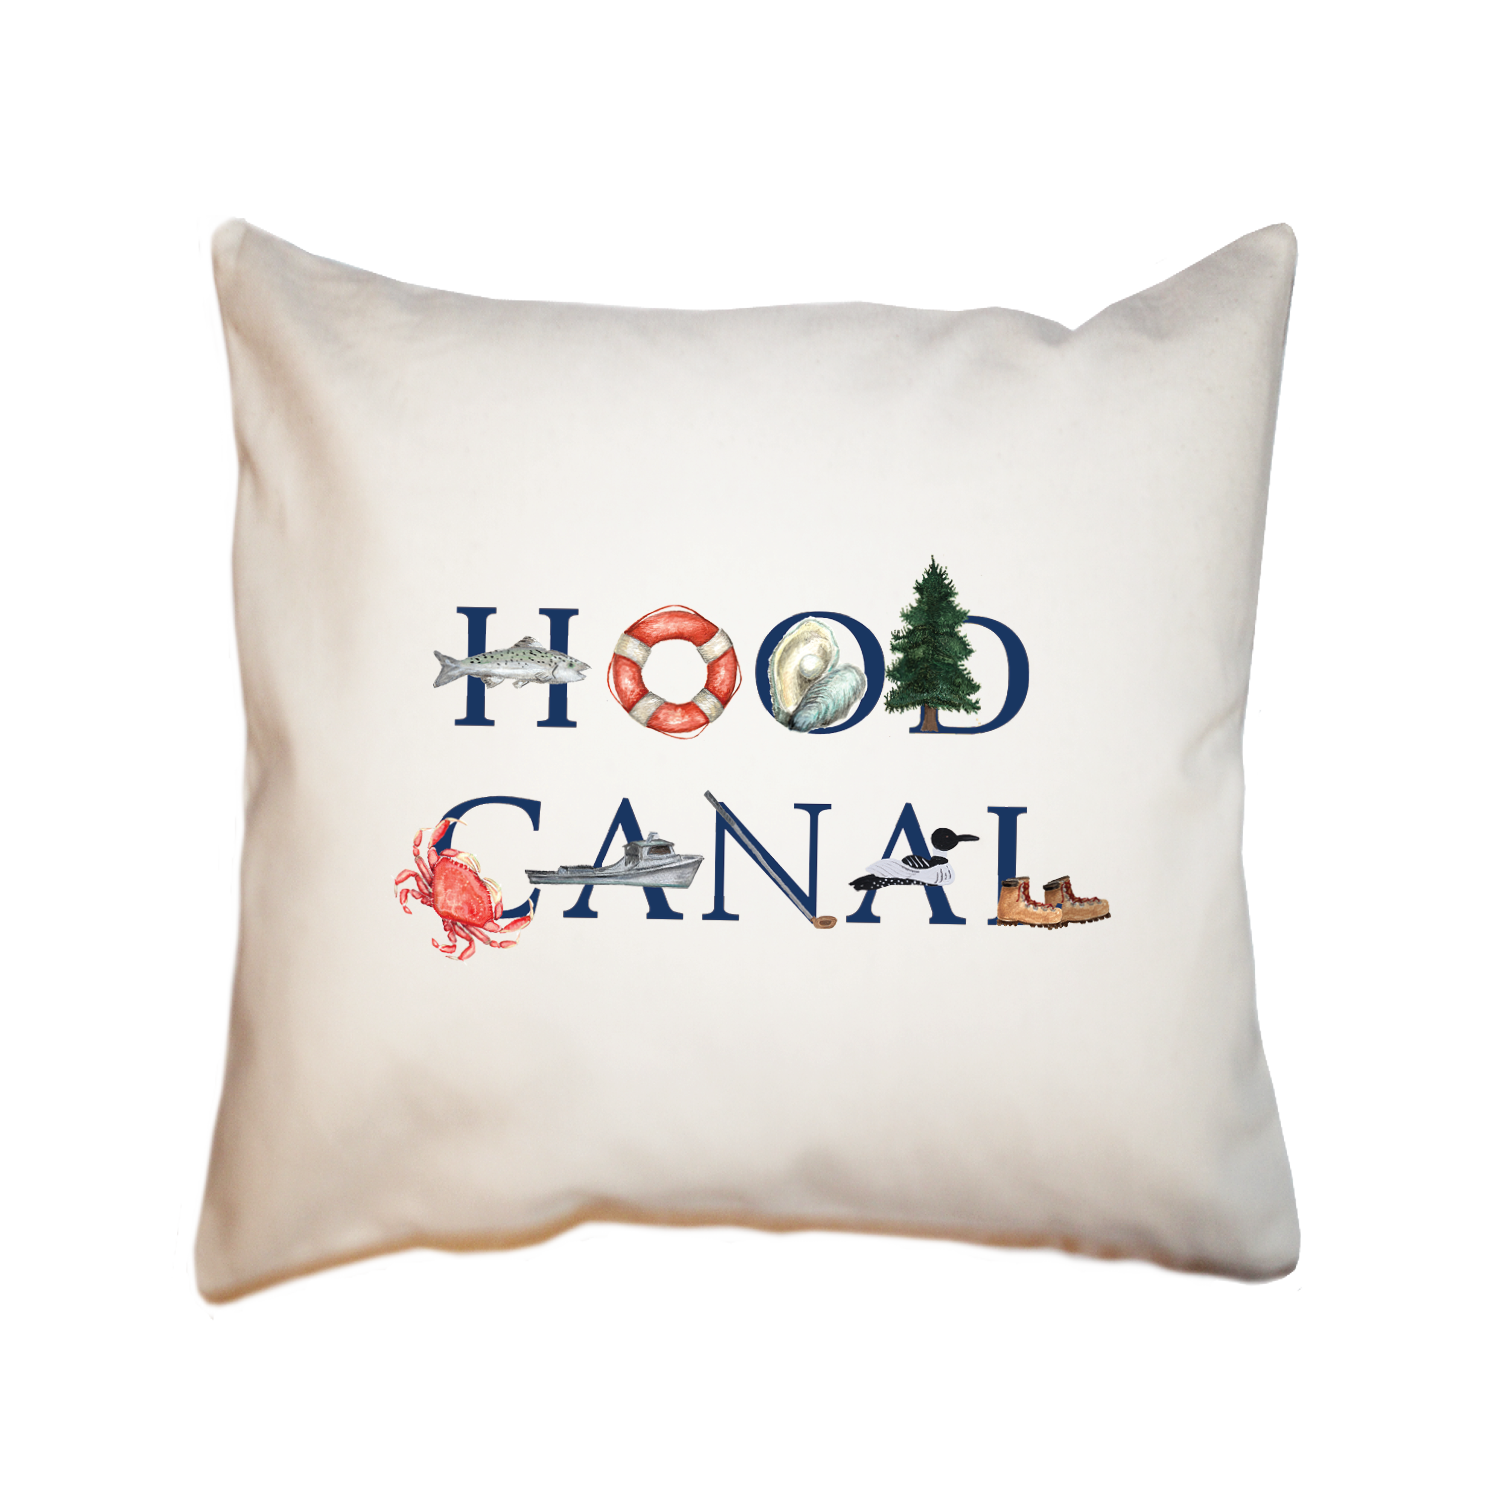 hood canal square pillow